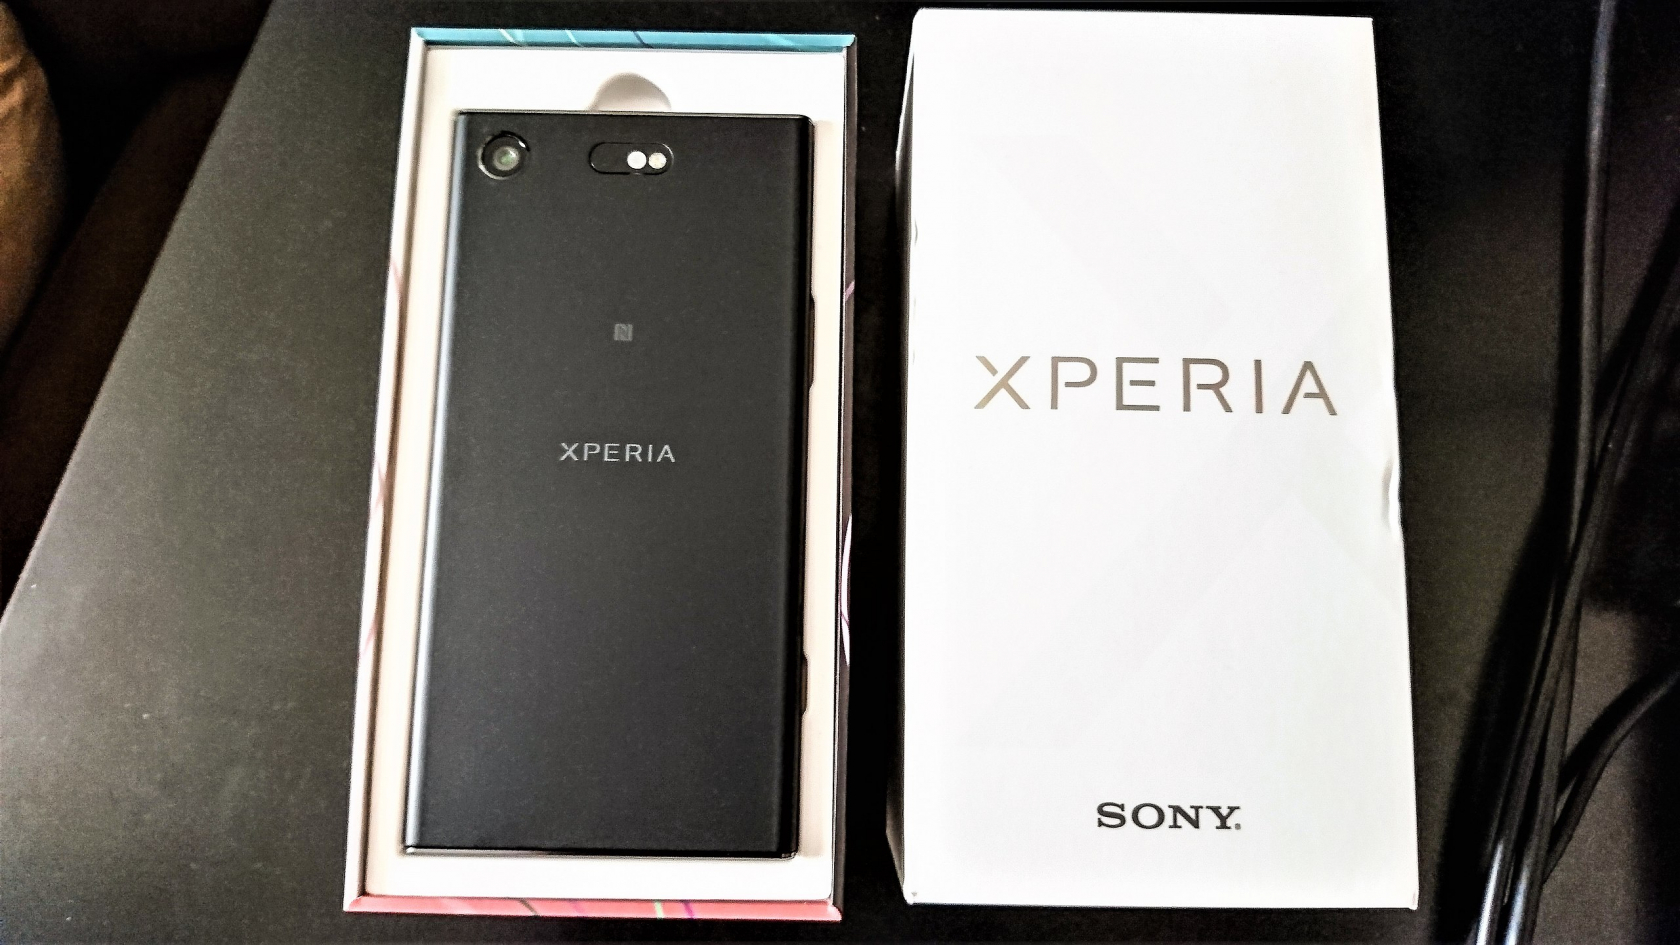 New leaks point to snapdragon 845-powered Sony Xperia XZ1 successor